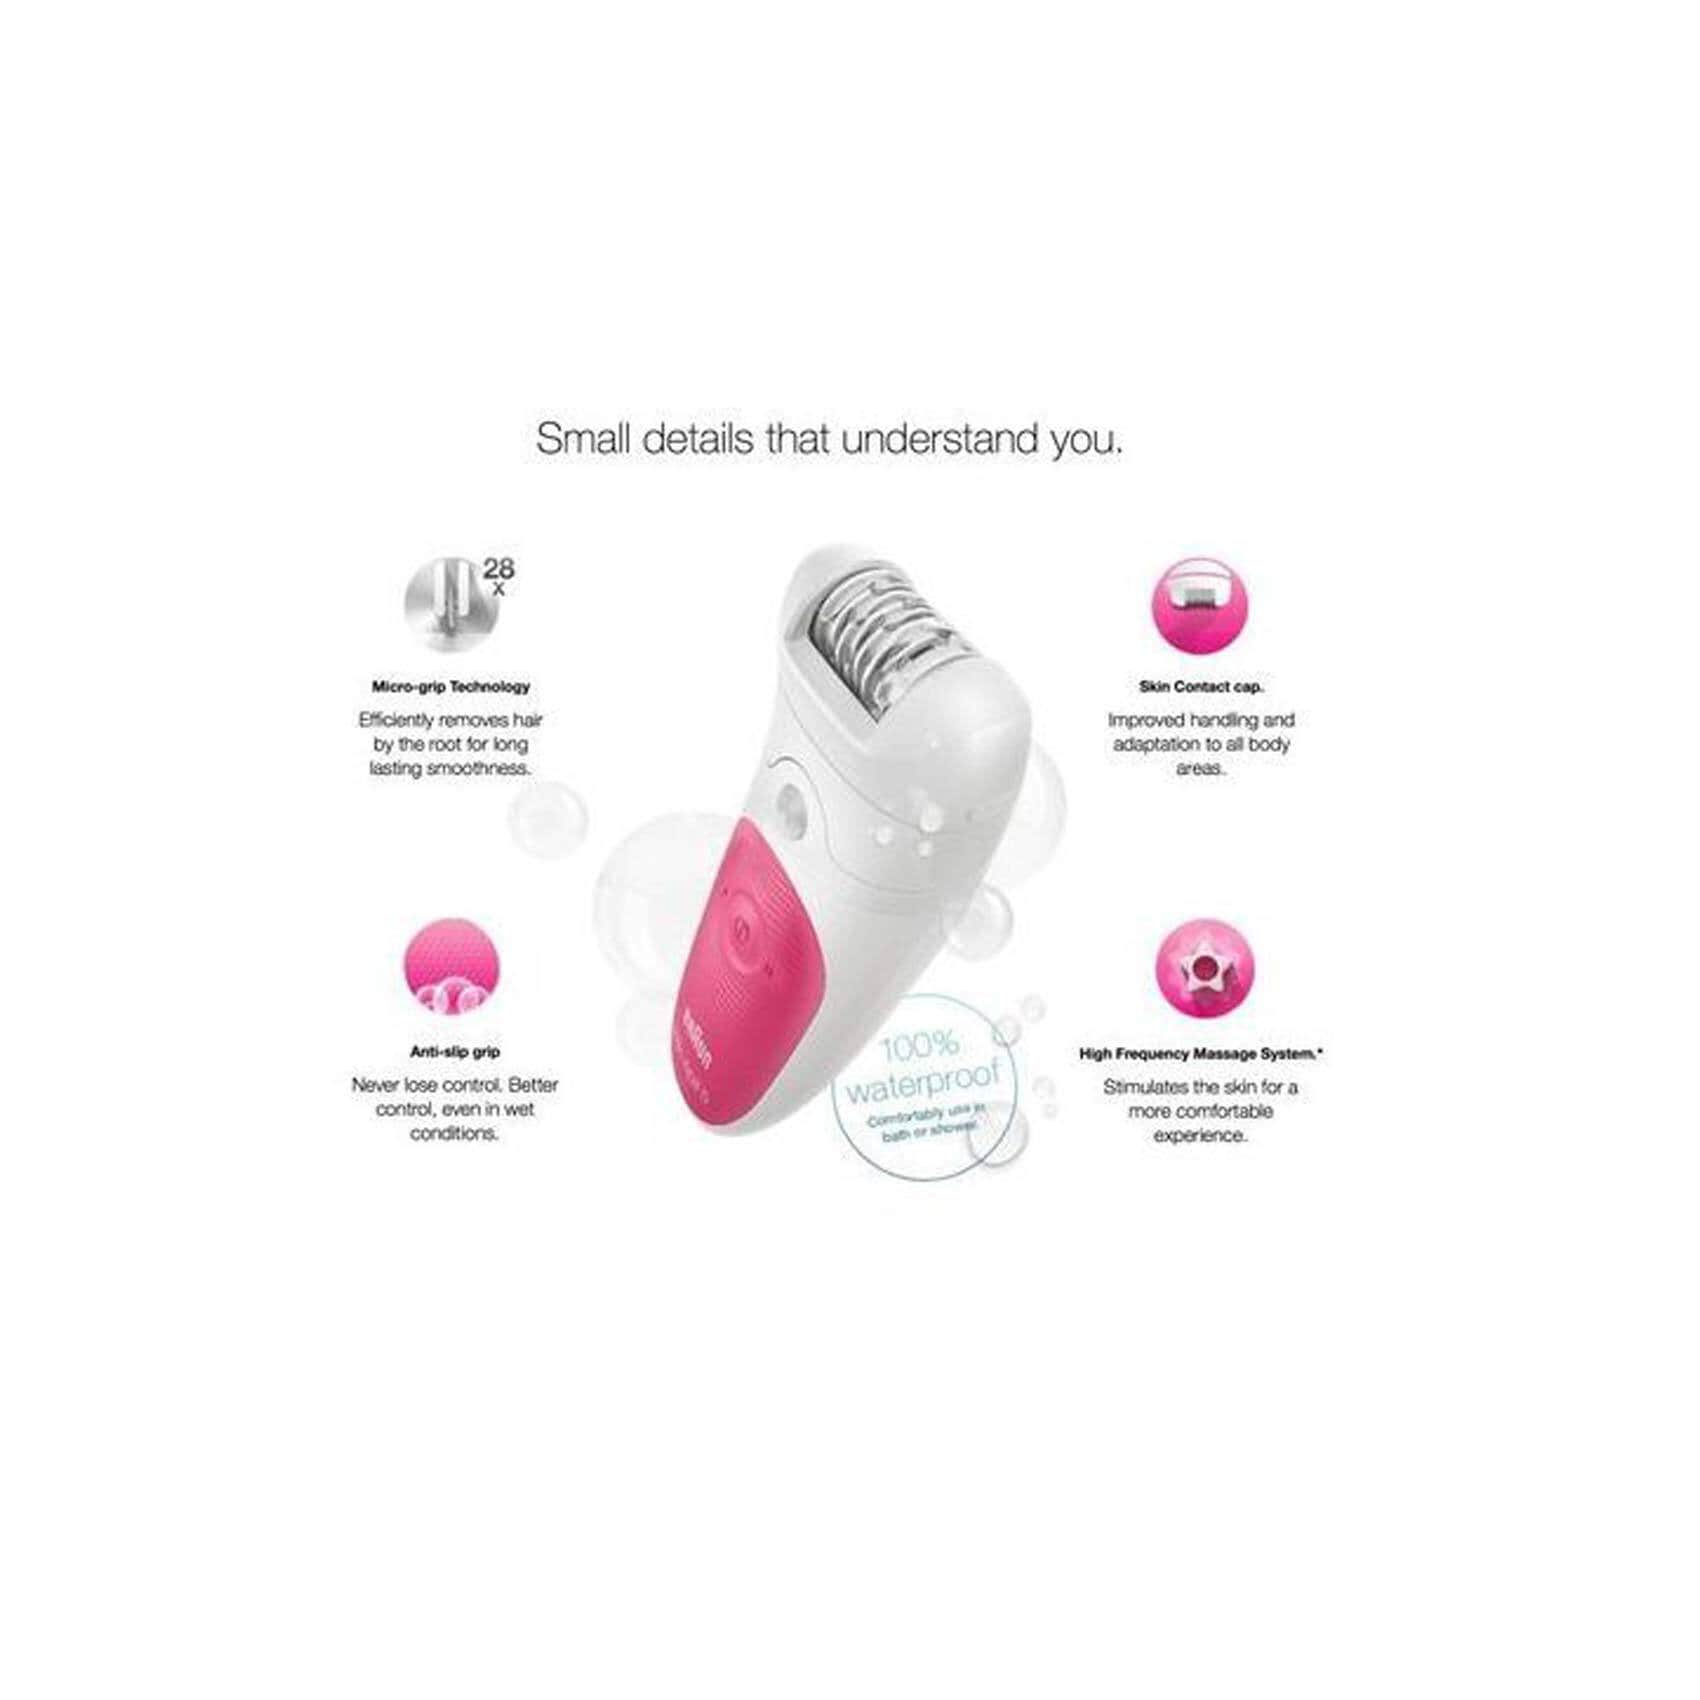 Buy Braun 5-513 Silk - Carrefour Dry Epil Pink Wet and 5 Personal - Care Cordless on Beauty & Egypt Shop Online Epilator